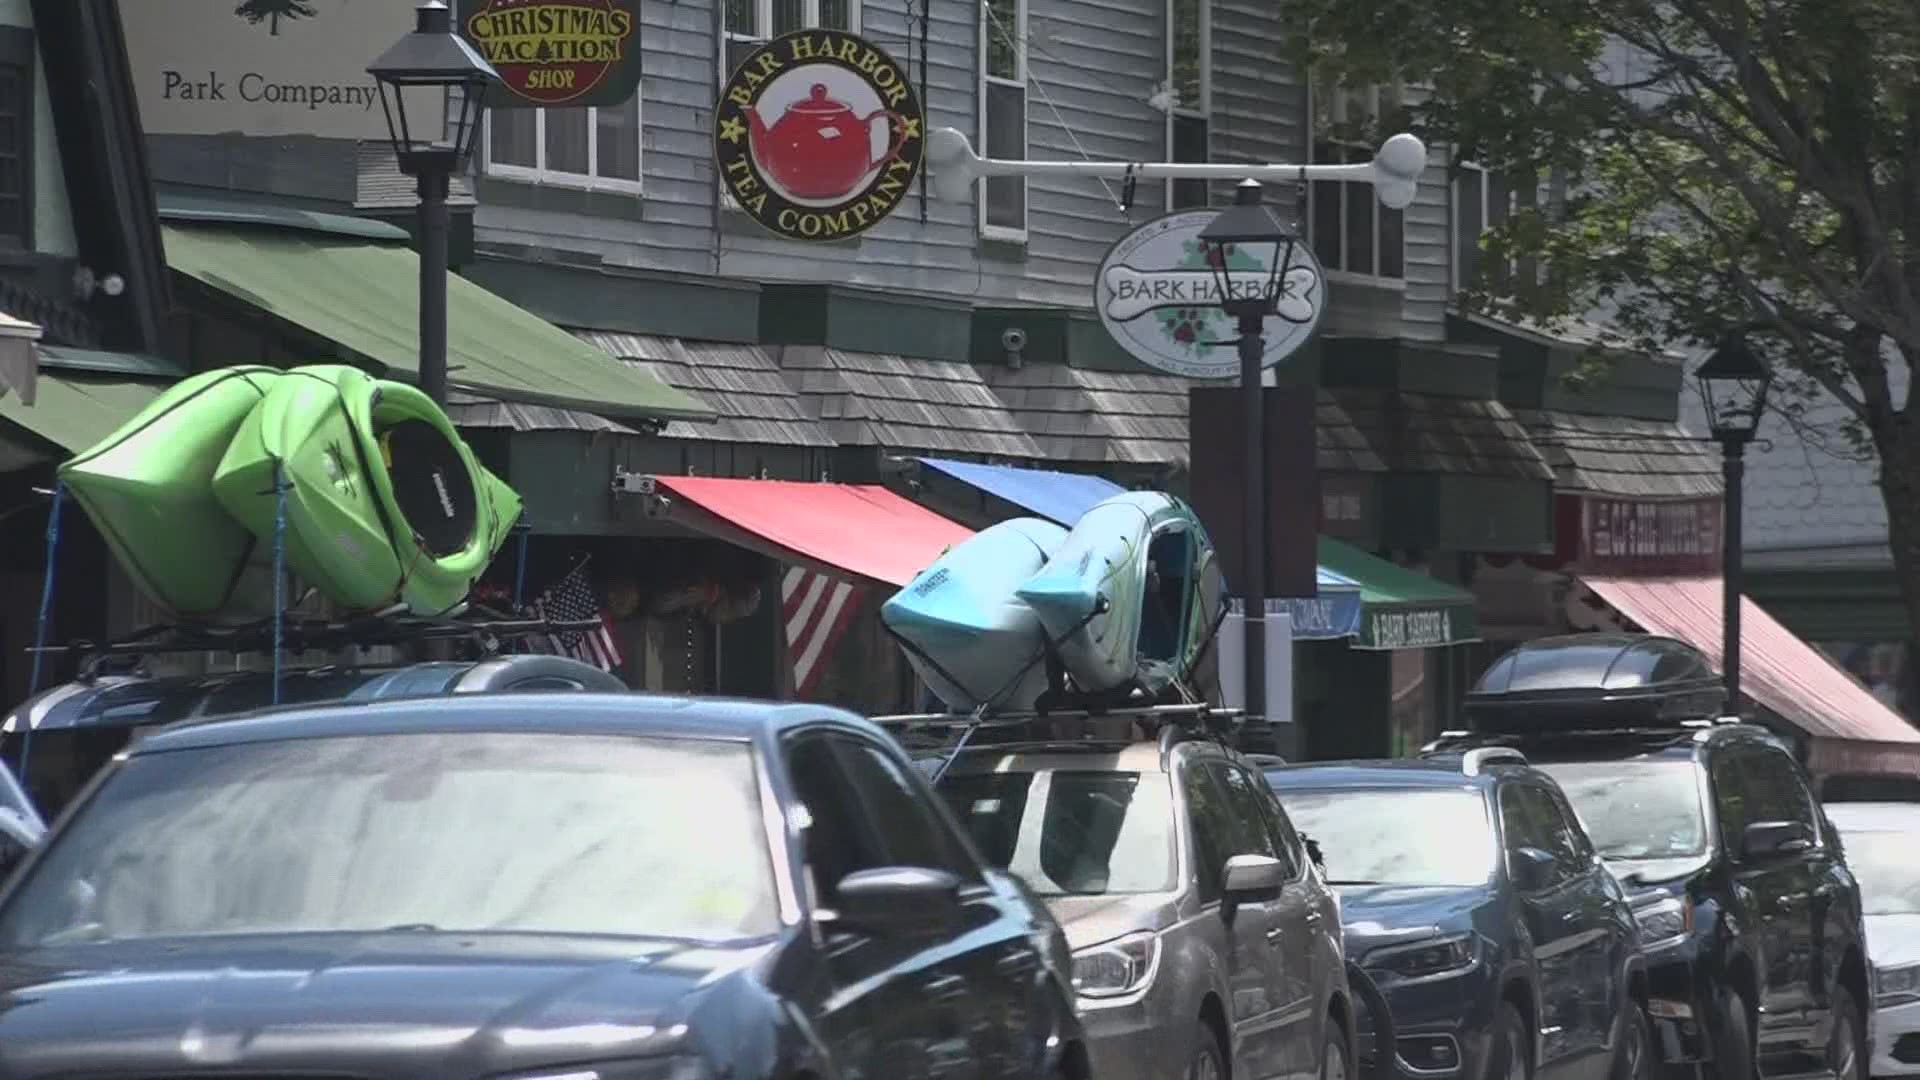 Covid-19 is having a huge impact on tourism in Maine, which means many businesses are struggling to generate revenue this summer.